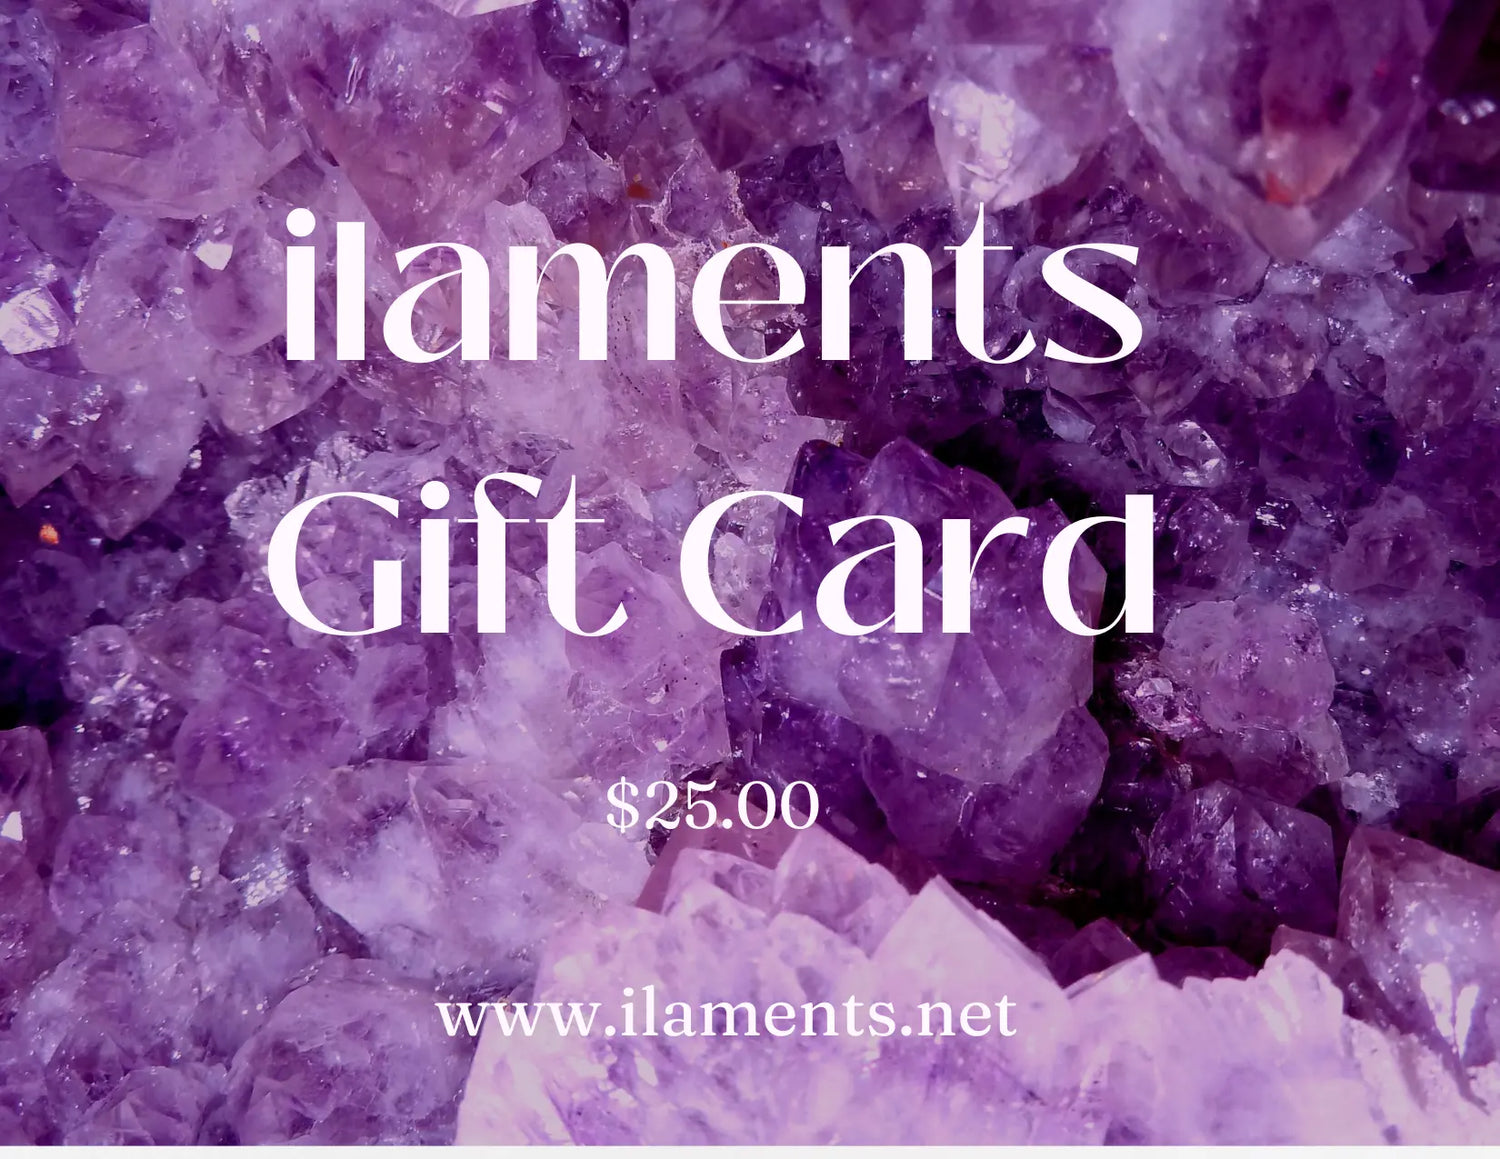 ilaments Gift Cards